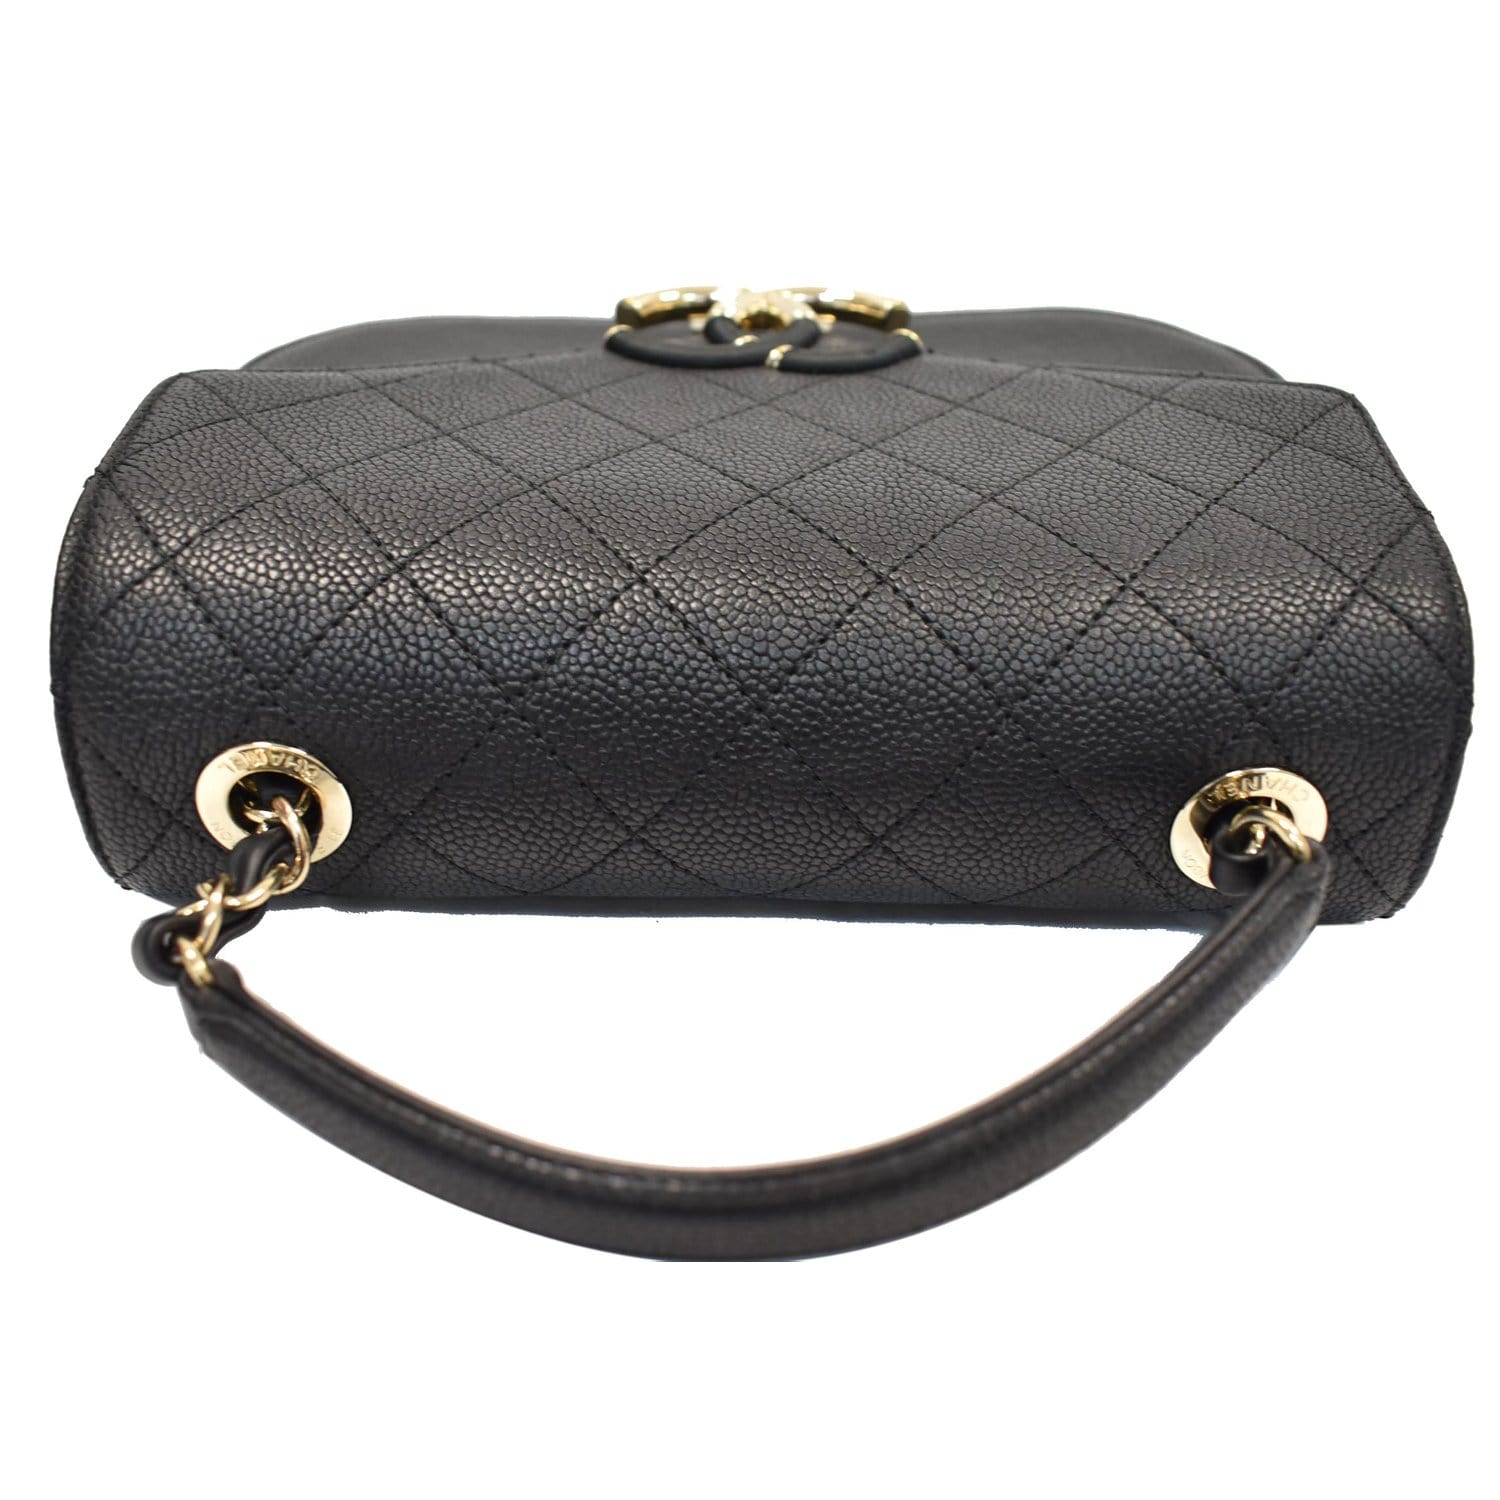 Coco handle leather handbag Chanel Black in Leather - 36636592